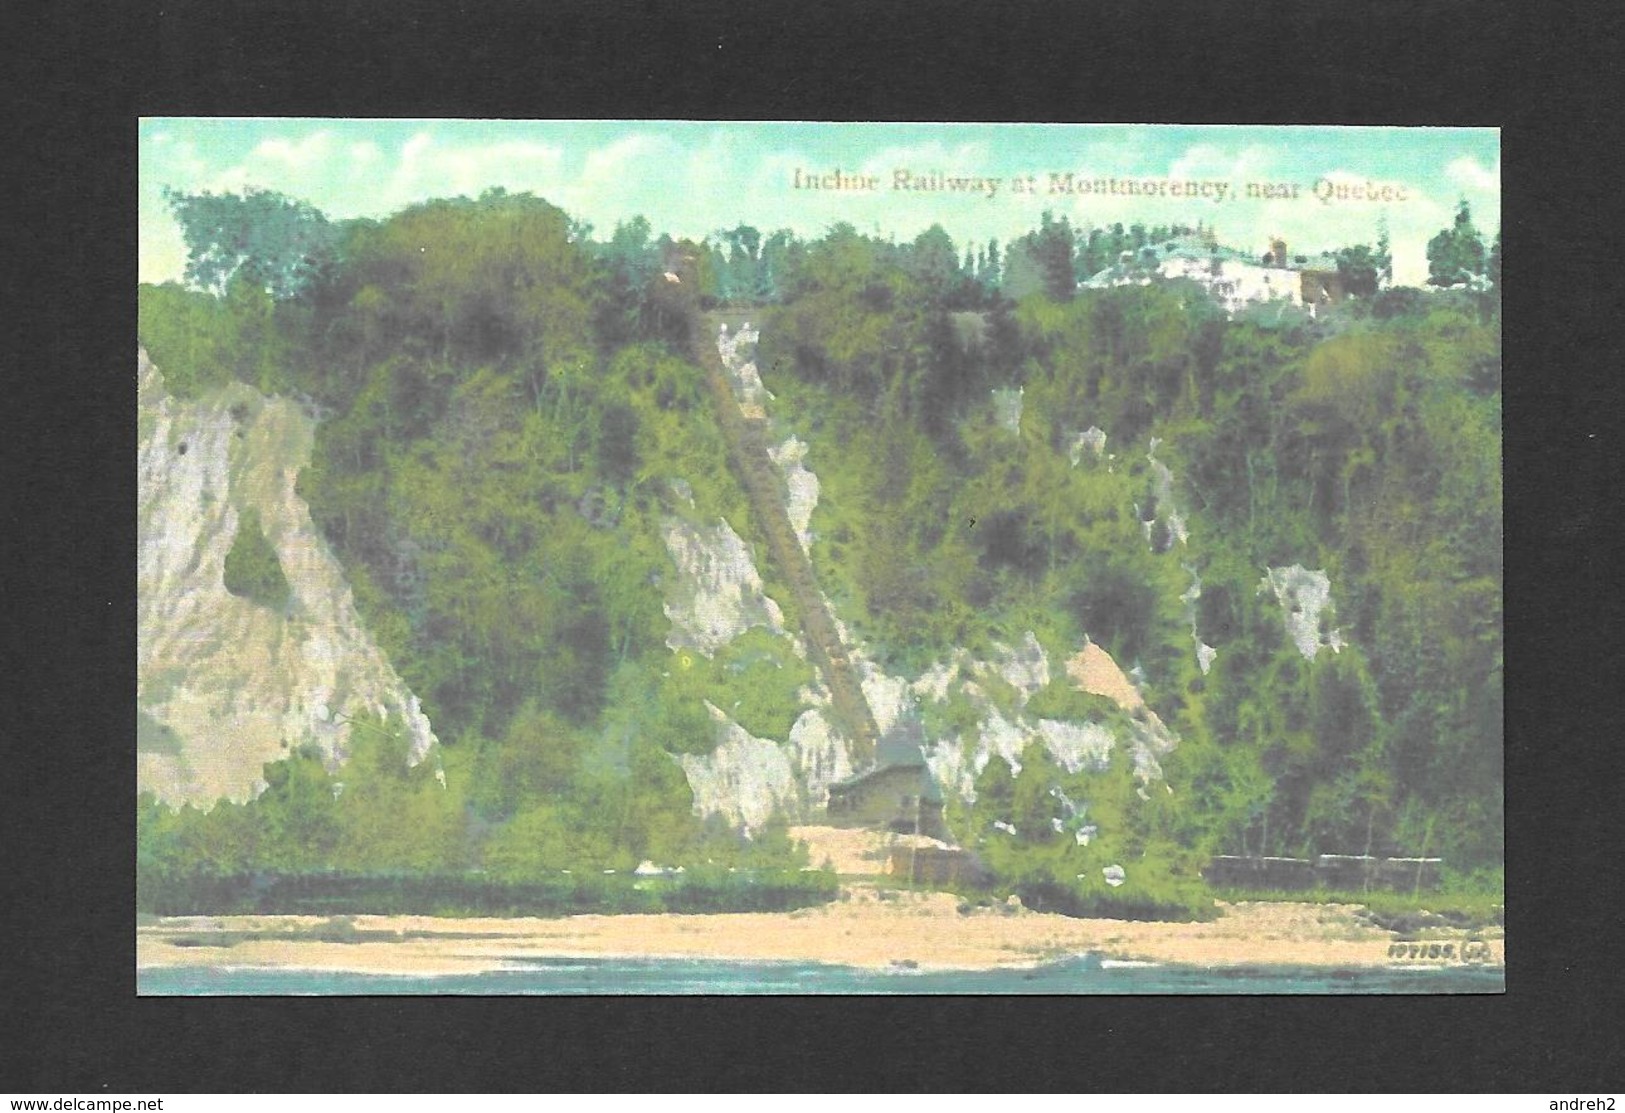 MONTMORENCY - QUÉBEC - (KENT HOUSE) - FUNICULAIRE DE LA CHUTE MONTMORENCY - INCLINE RAILWAY AT MONTMORENCY - Chutes Montmorency